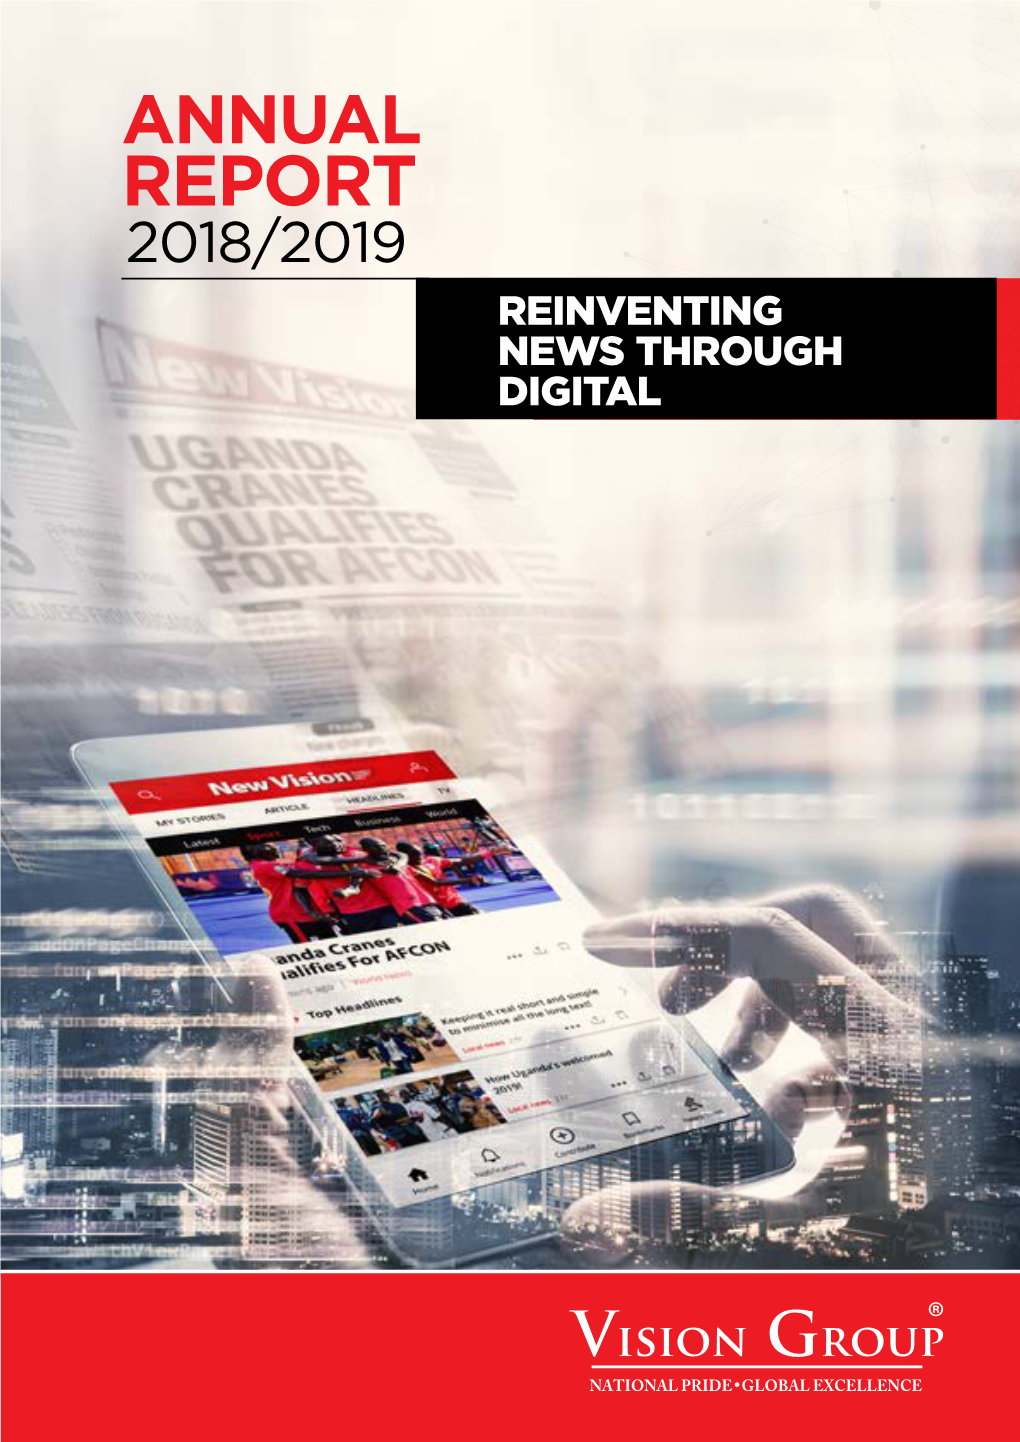 Report 2018/19 ANNUAL REPORT 2018/2019 REINVENTING NEWS THROUGH DIGITAL Vision Group 02 Annual Report 2018/19